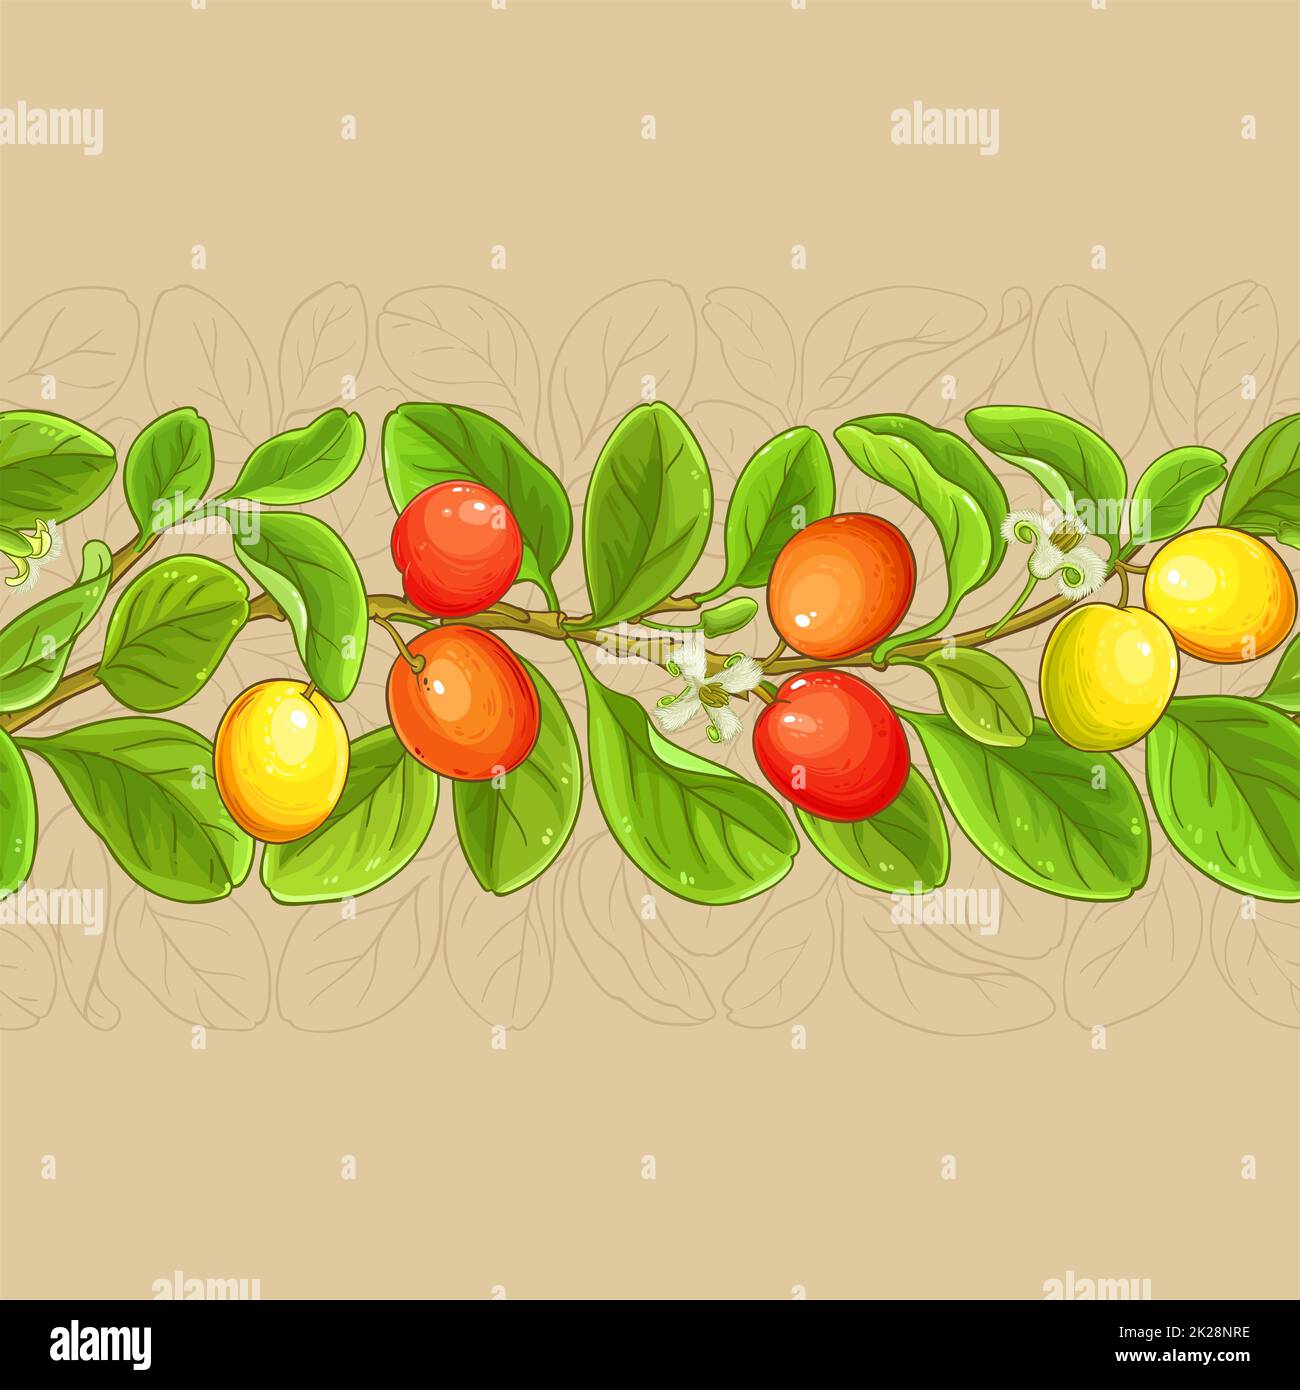 ximenia branches vector pattern on color background Stock Photo